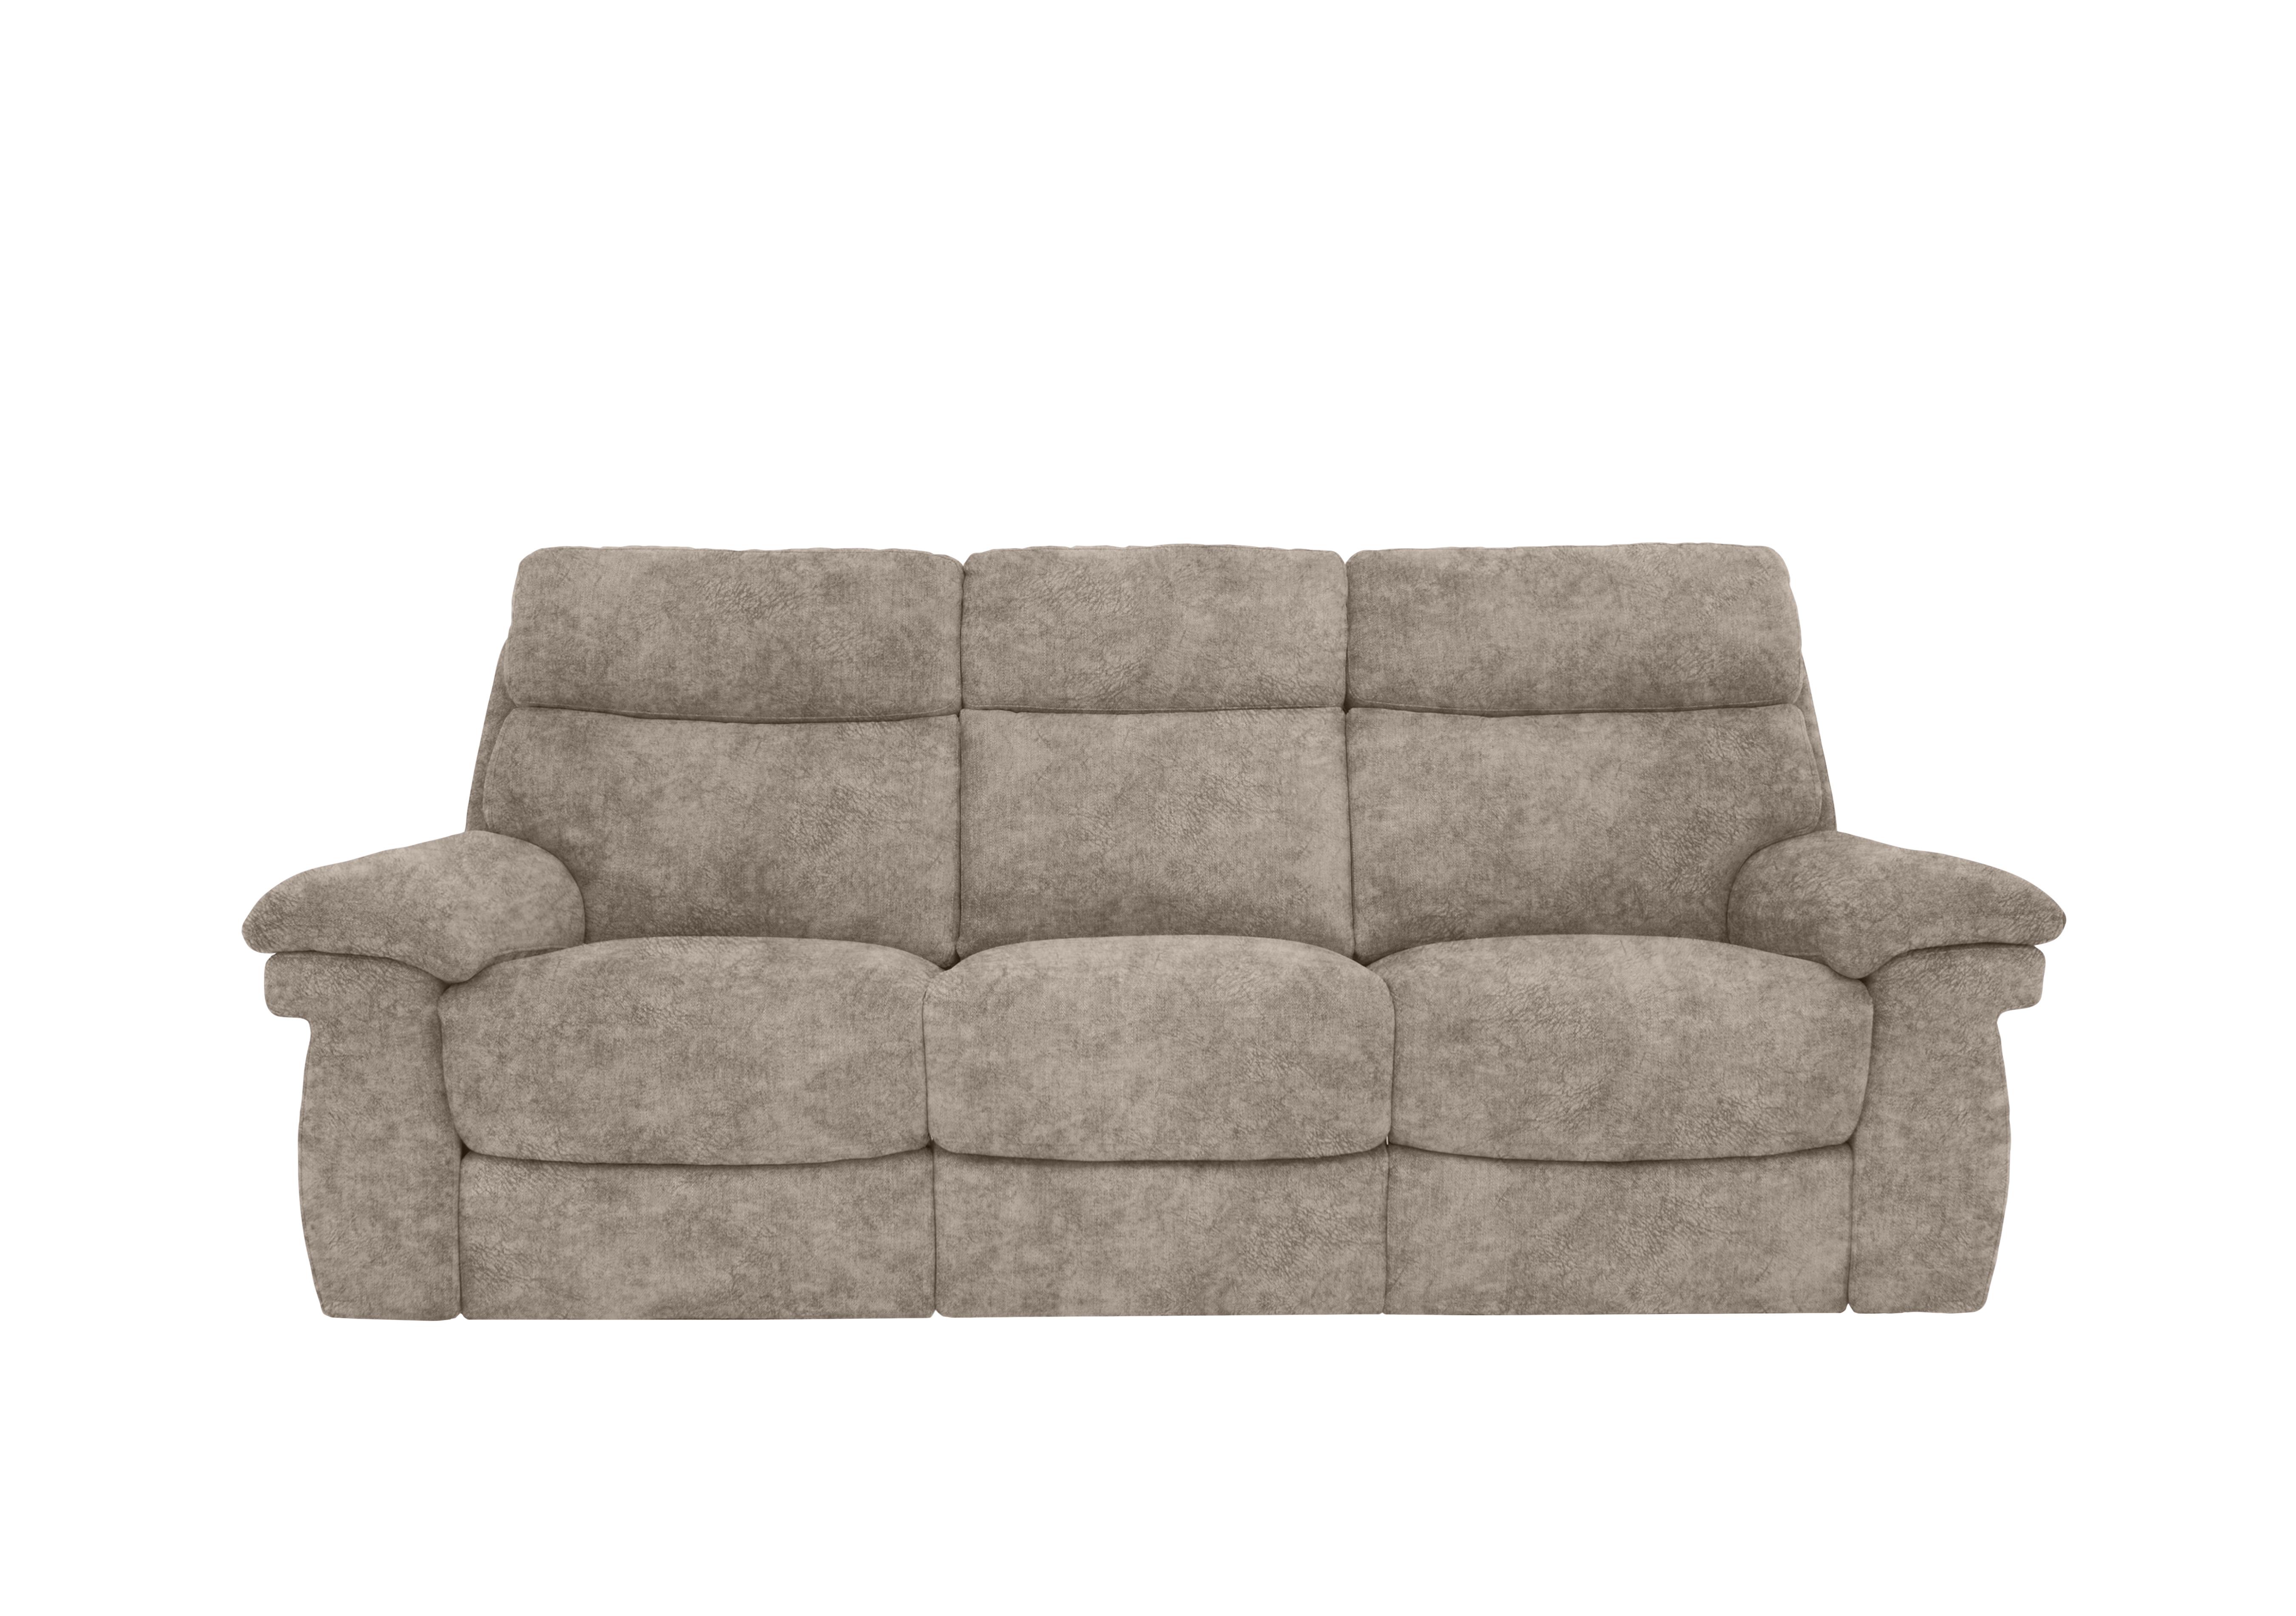 Serene 3 Seater Fabric Power Recliner Sofa with Drop Down Table and Power Headrests in Bfa-Bnn-R29 Mink on Furniture Village